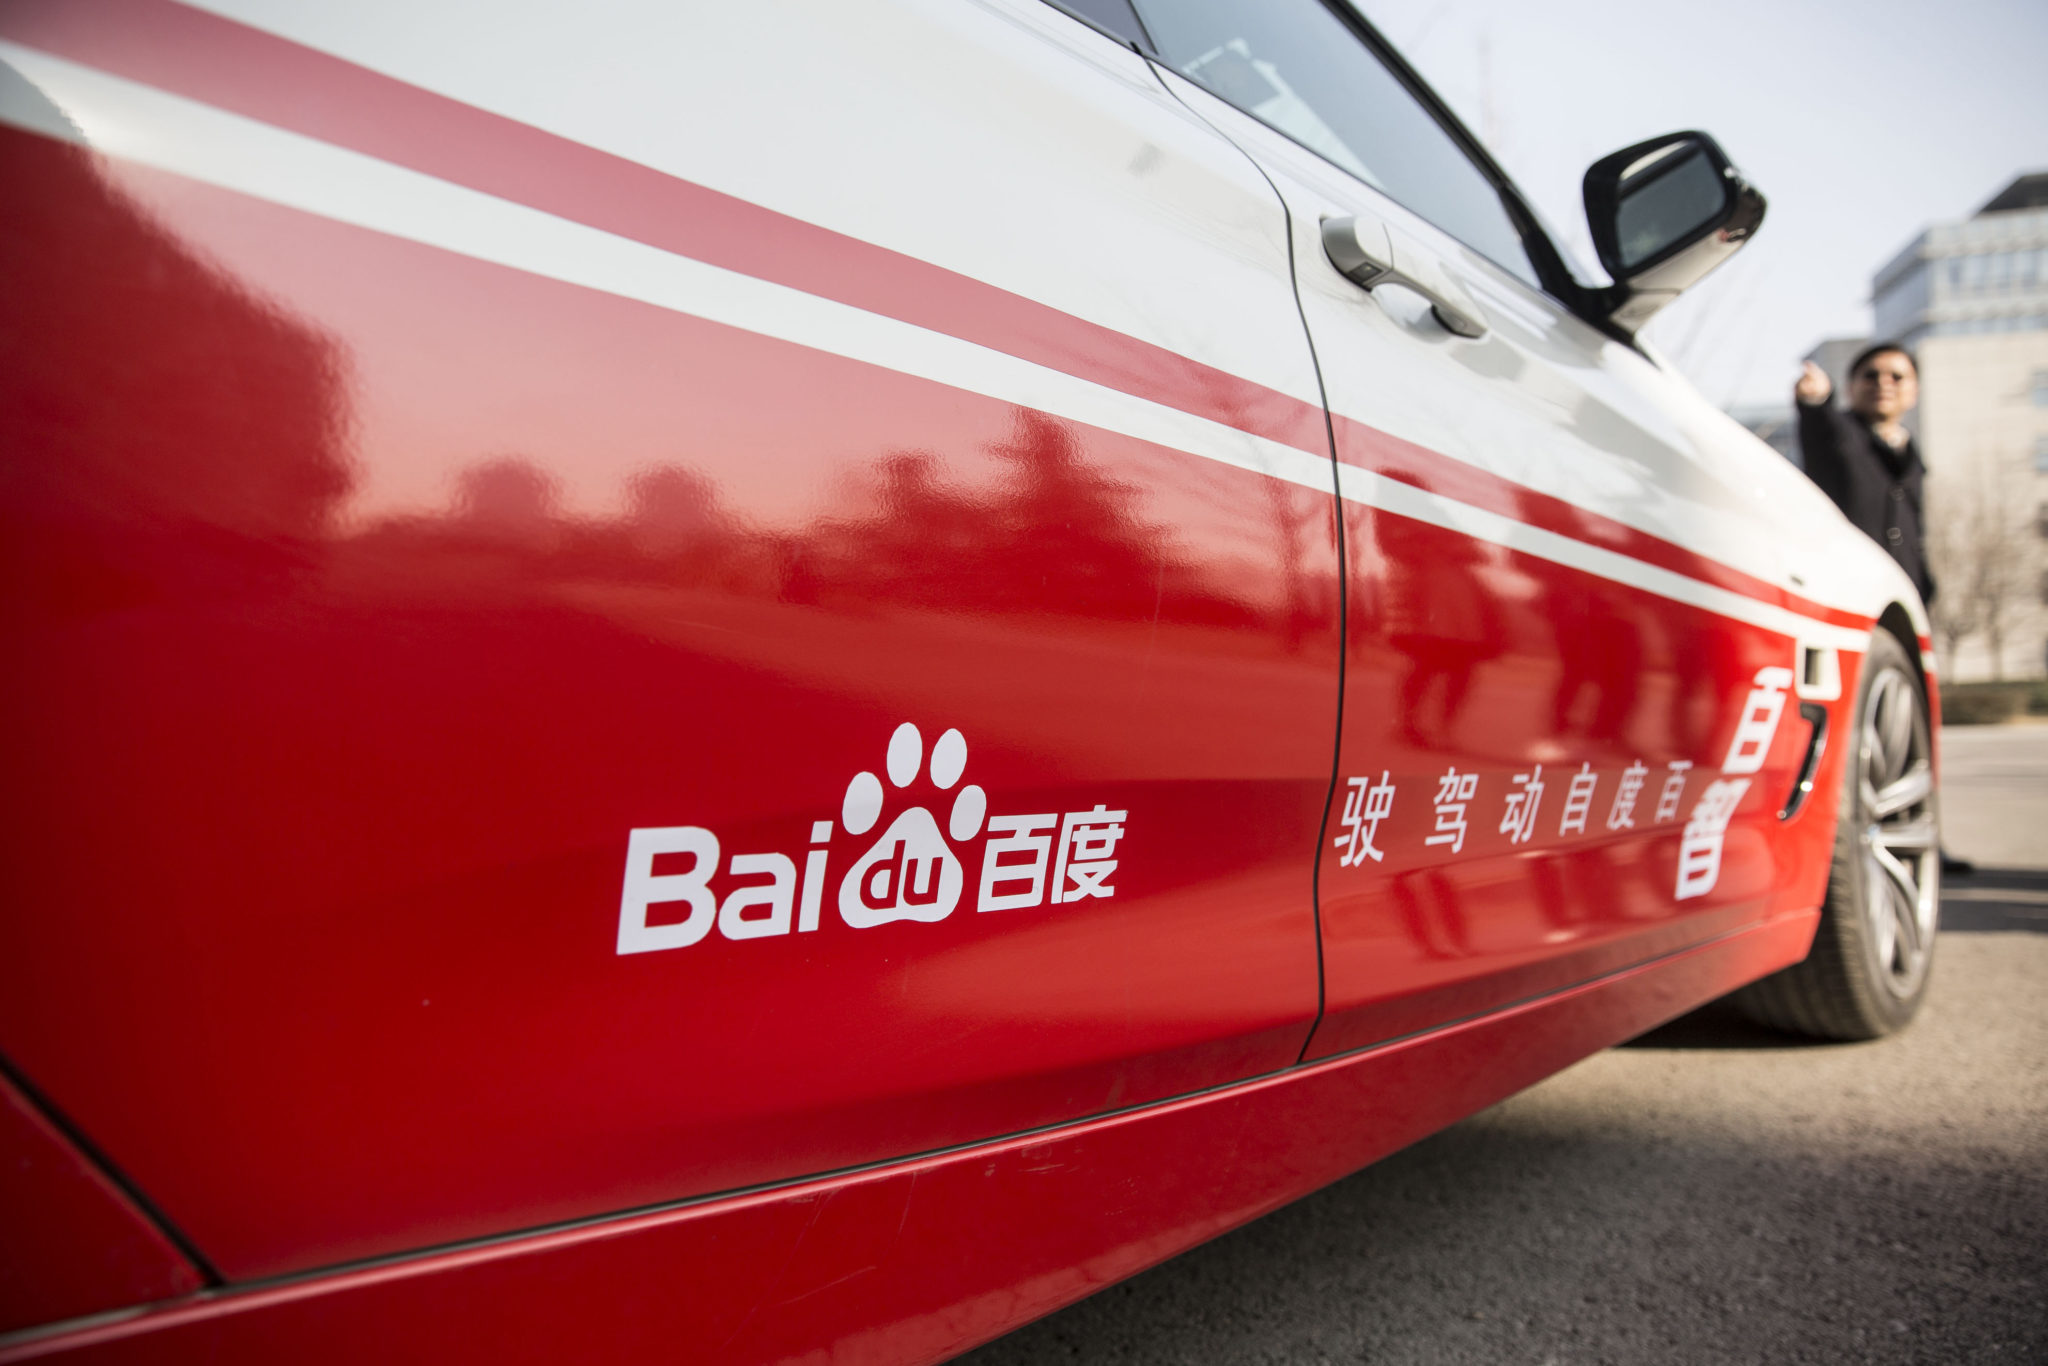 Baidu gets first permits in China to operate fully driverless robotaxi services